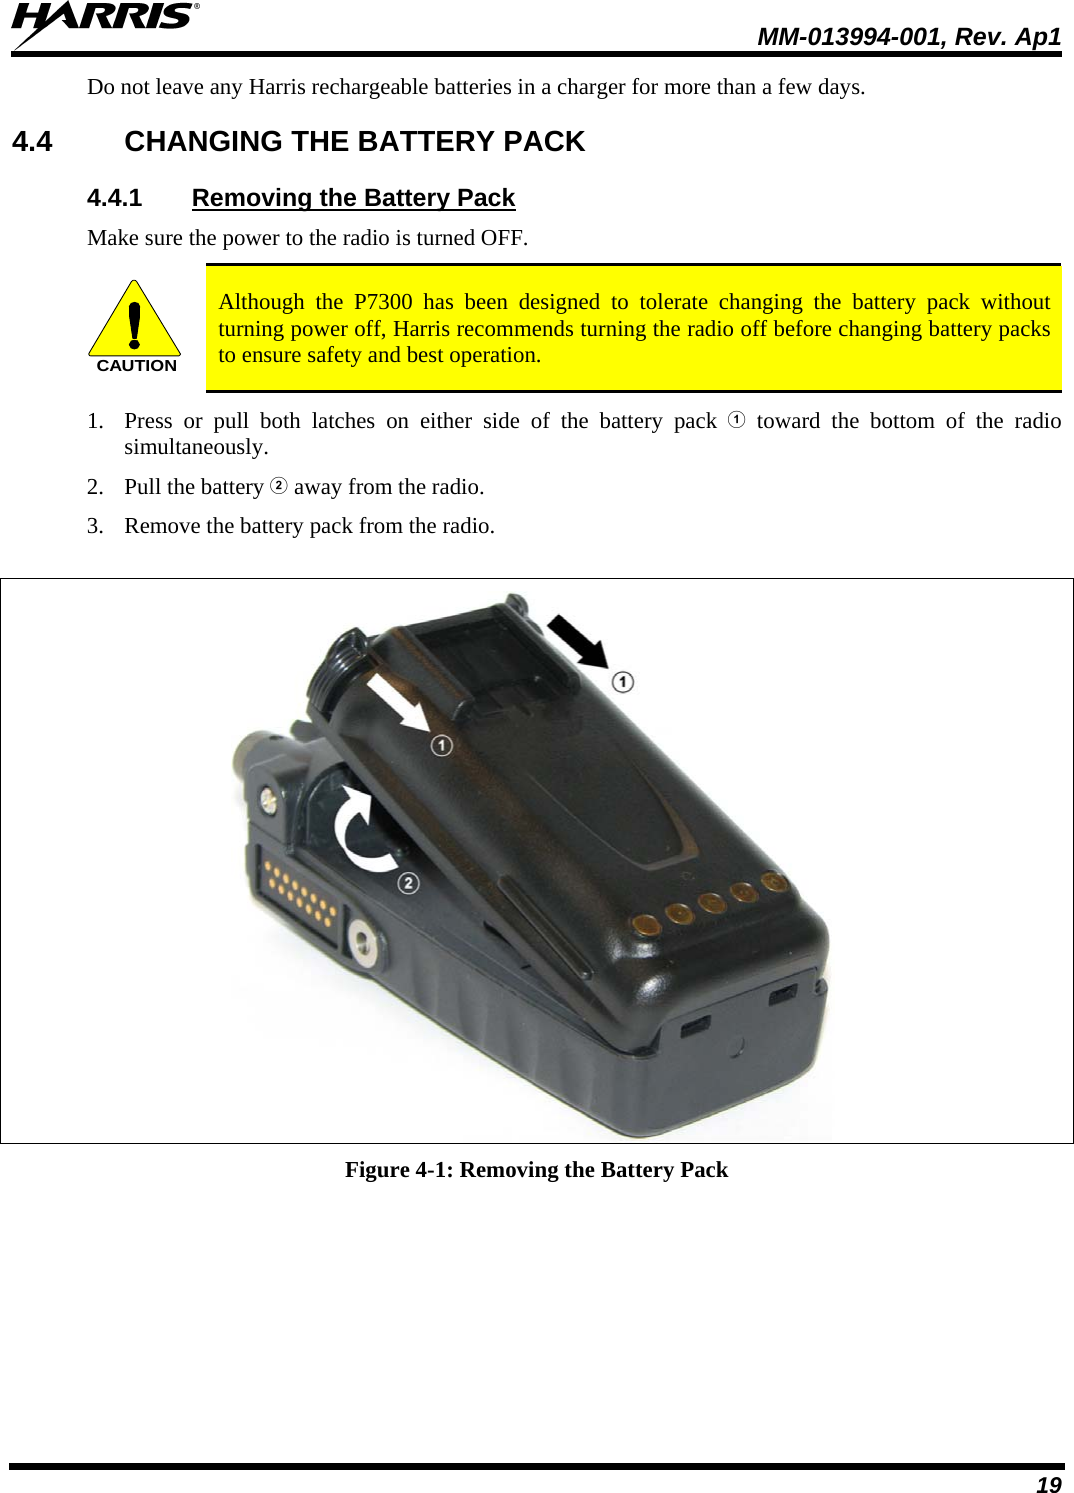  MM-013994-001, Rev. Ap1 19 Do not leave any Harris rechargeable batteries in a charger for more than a few days.  4.4  CHANGING THE BATTERY PACK 4.4.1  Removing the Battery Pack Make sure the power to the radio is turned OFF. CAUTION Although the P7300 has been designed to tolerate changing the battery pack without turning power off, Harris recommends turning the radio off before changing battery packs to ensure safety and best operation. 1. Press or pull both latches on either side of the battery pack  toward the bottom of the radio simultaneously.  2. Pull the battery  away from the radio. 3. Remove the battery pack from the radio.   Figure 4-1: Removing the Battery Pack 